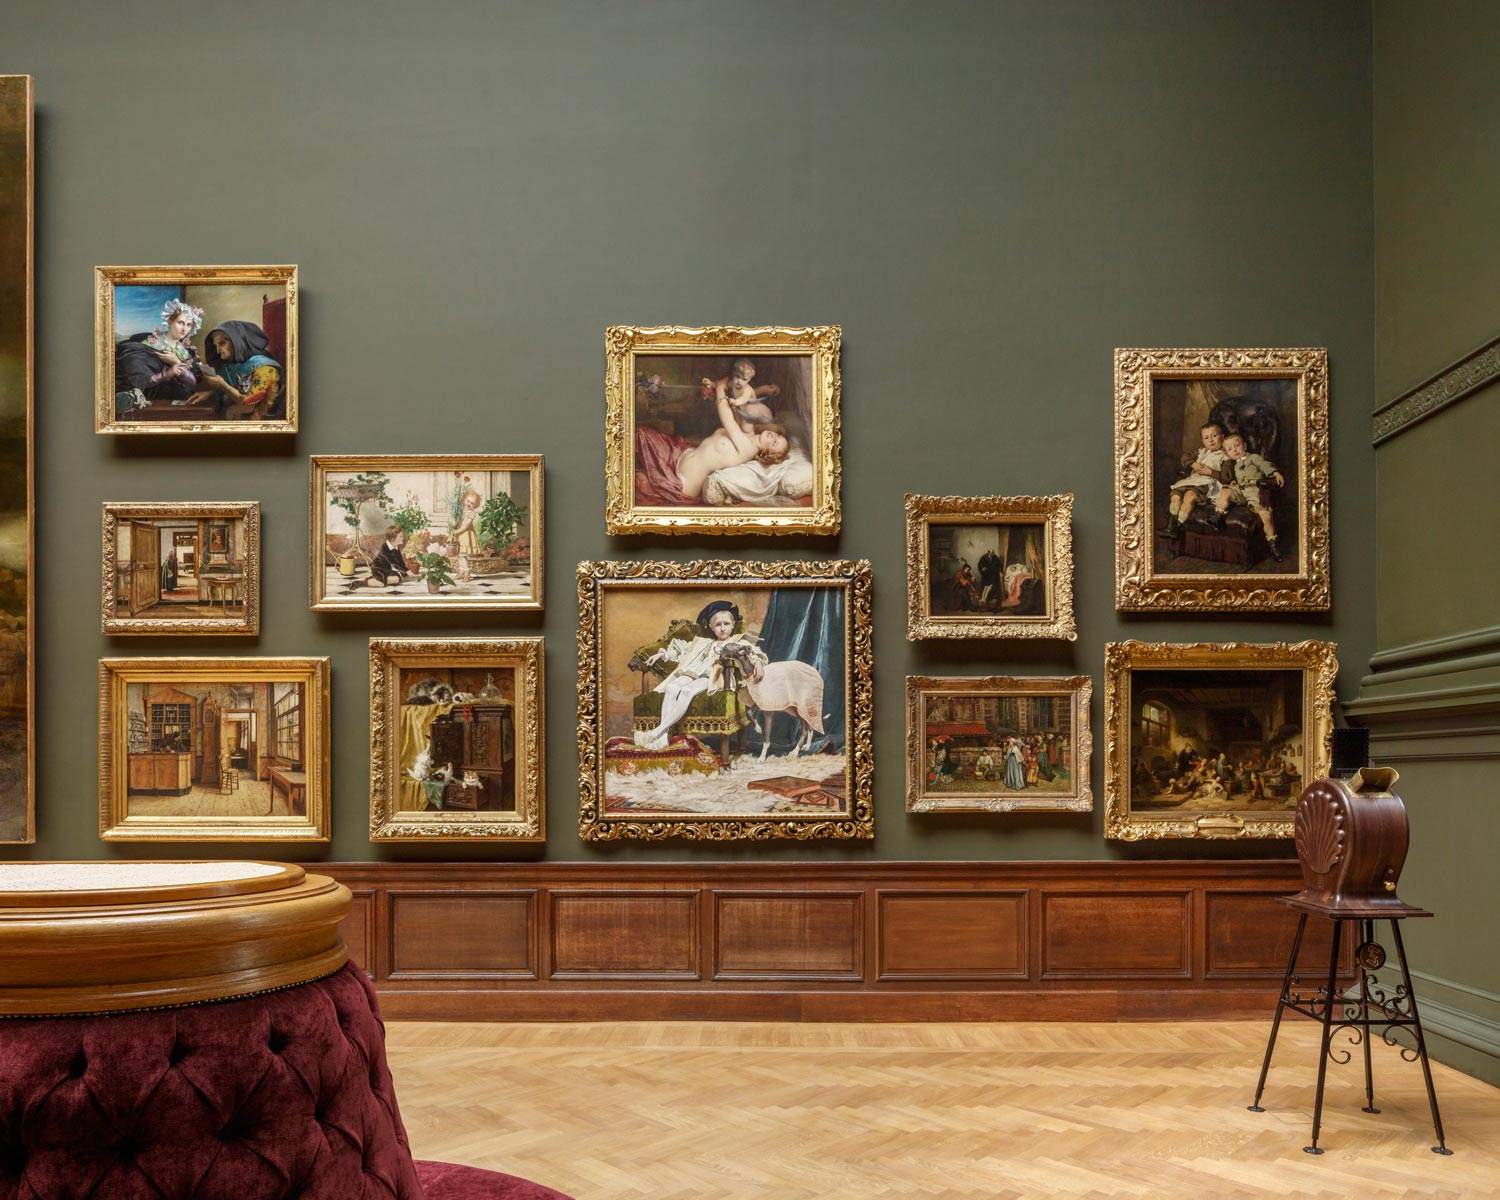 Antwerp, after 11 years of work reopens KMSKA, the Royal Museum of Fine Arts 